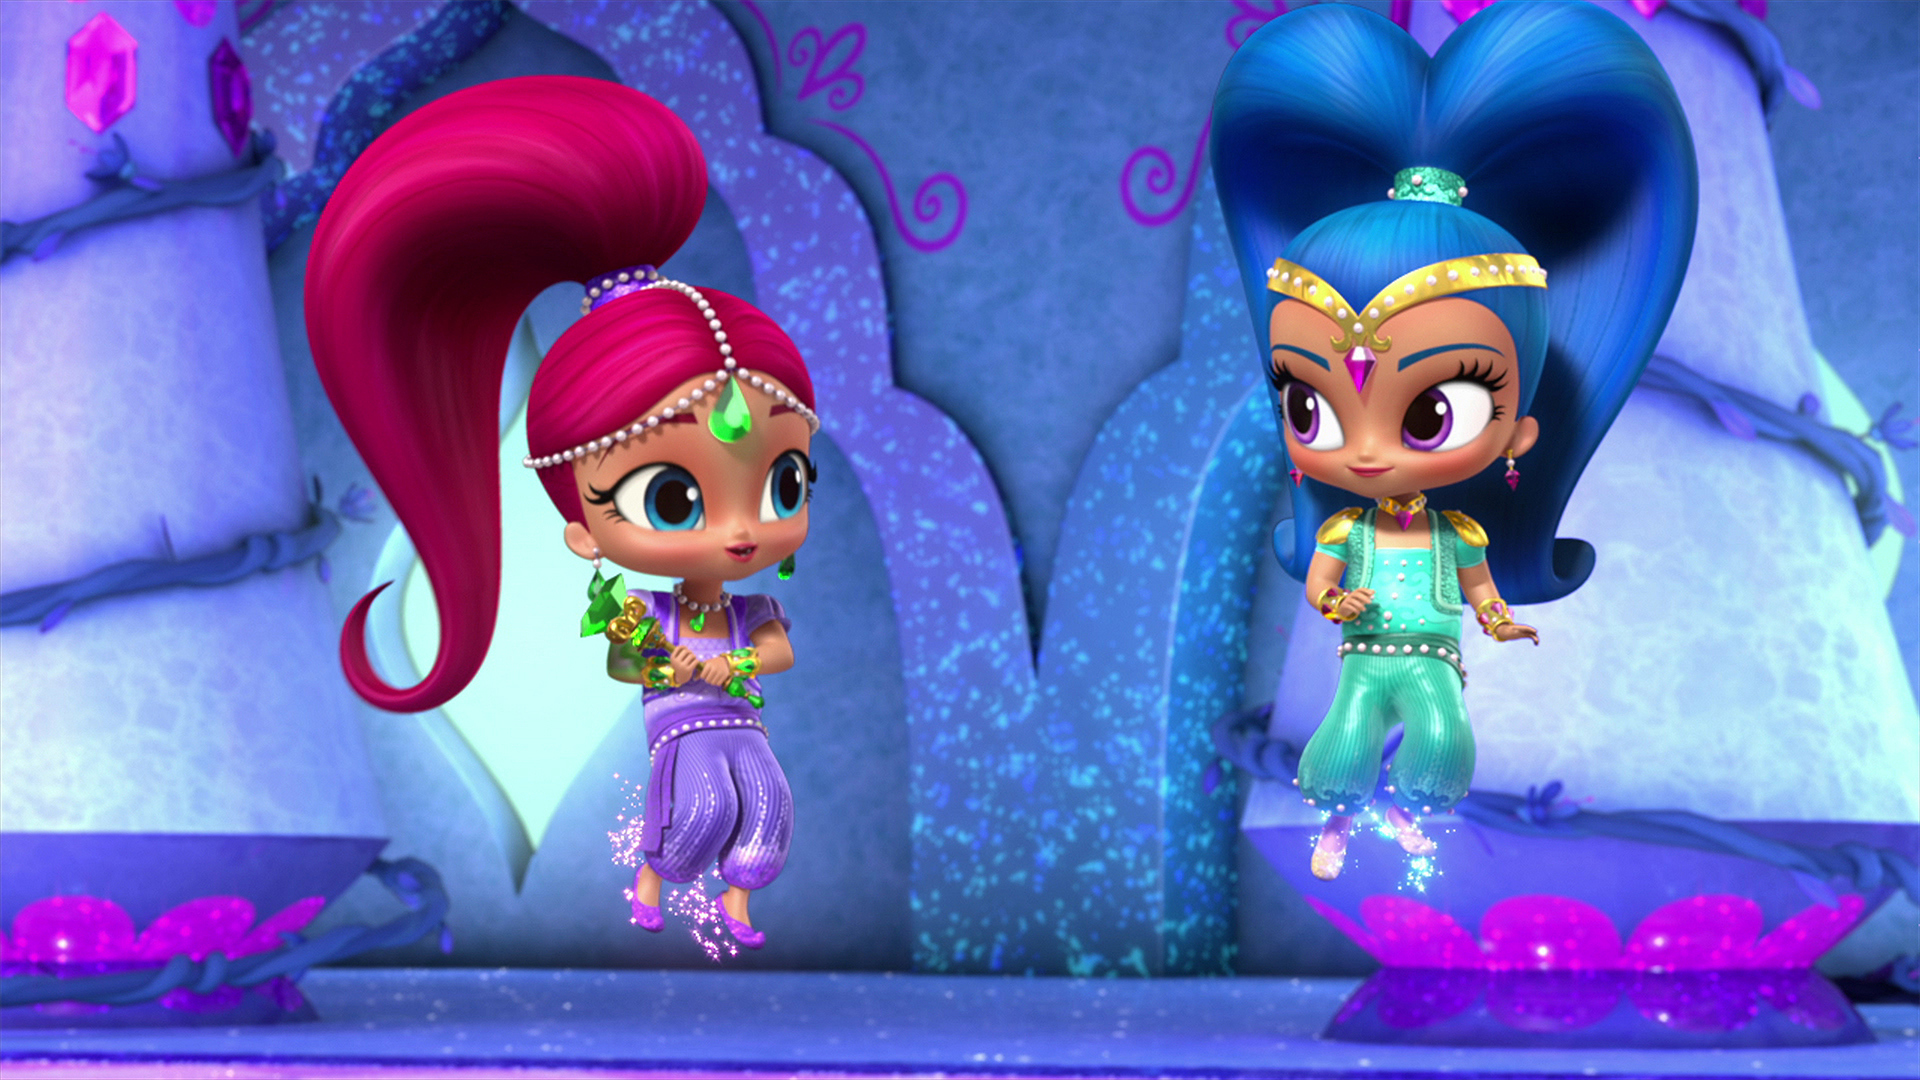 shimmer and shine episodes free